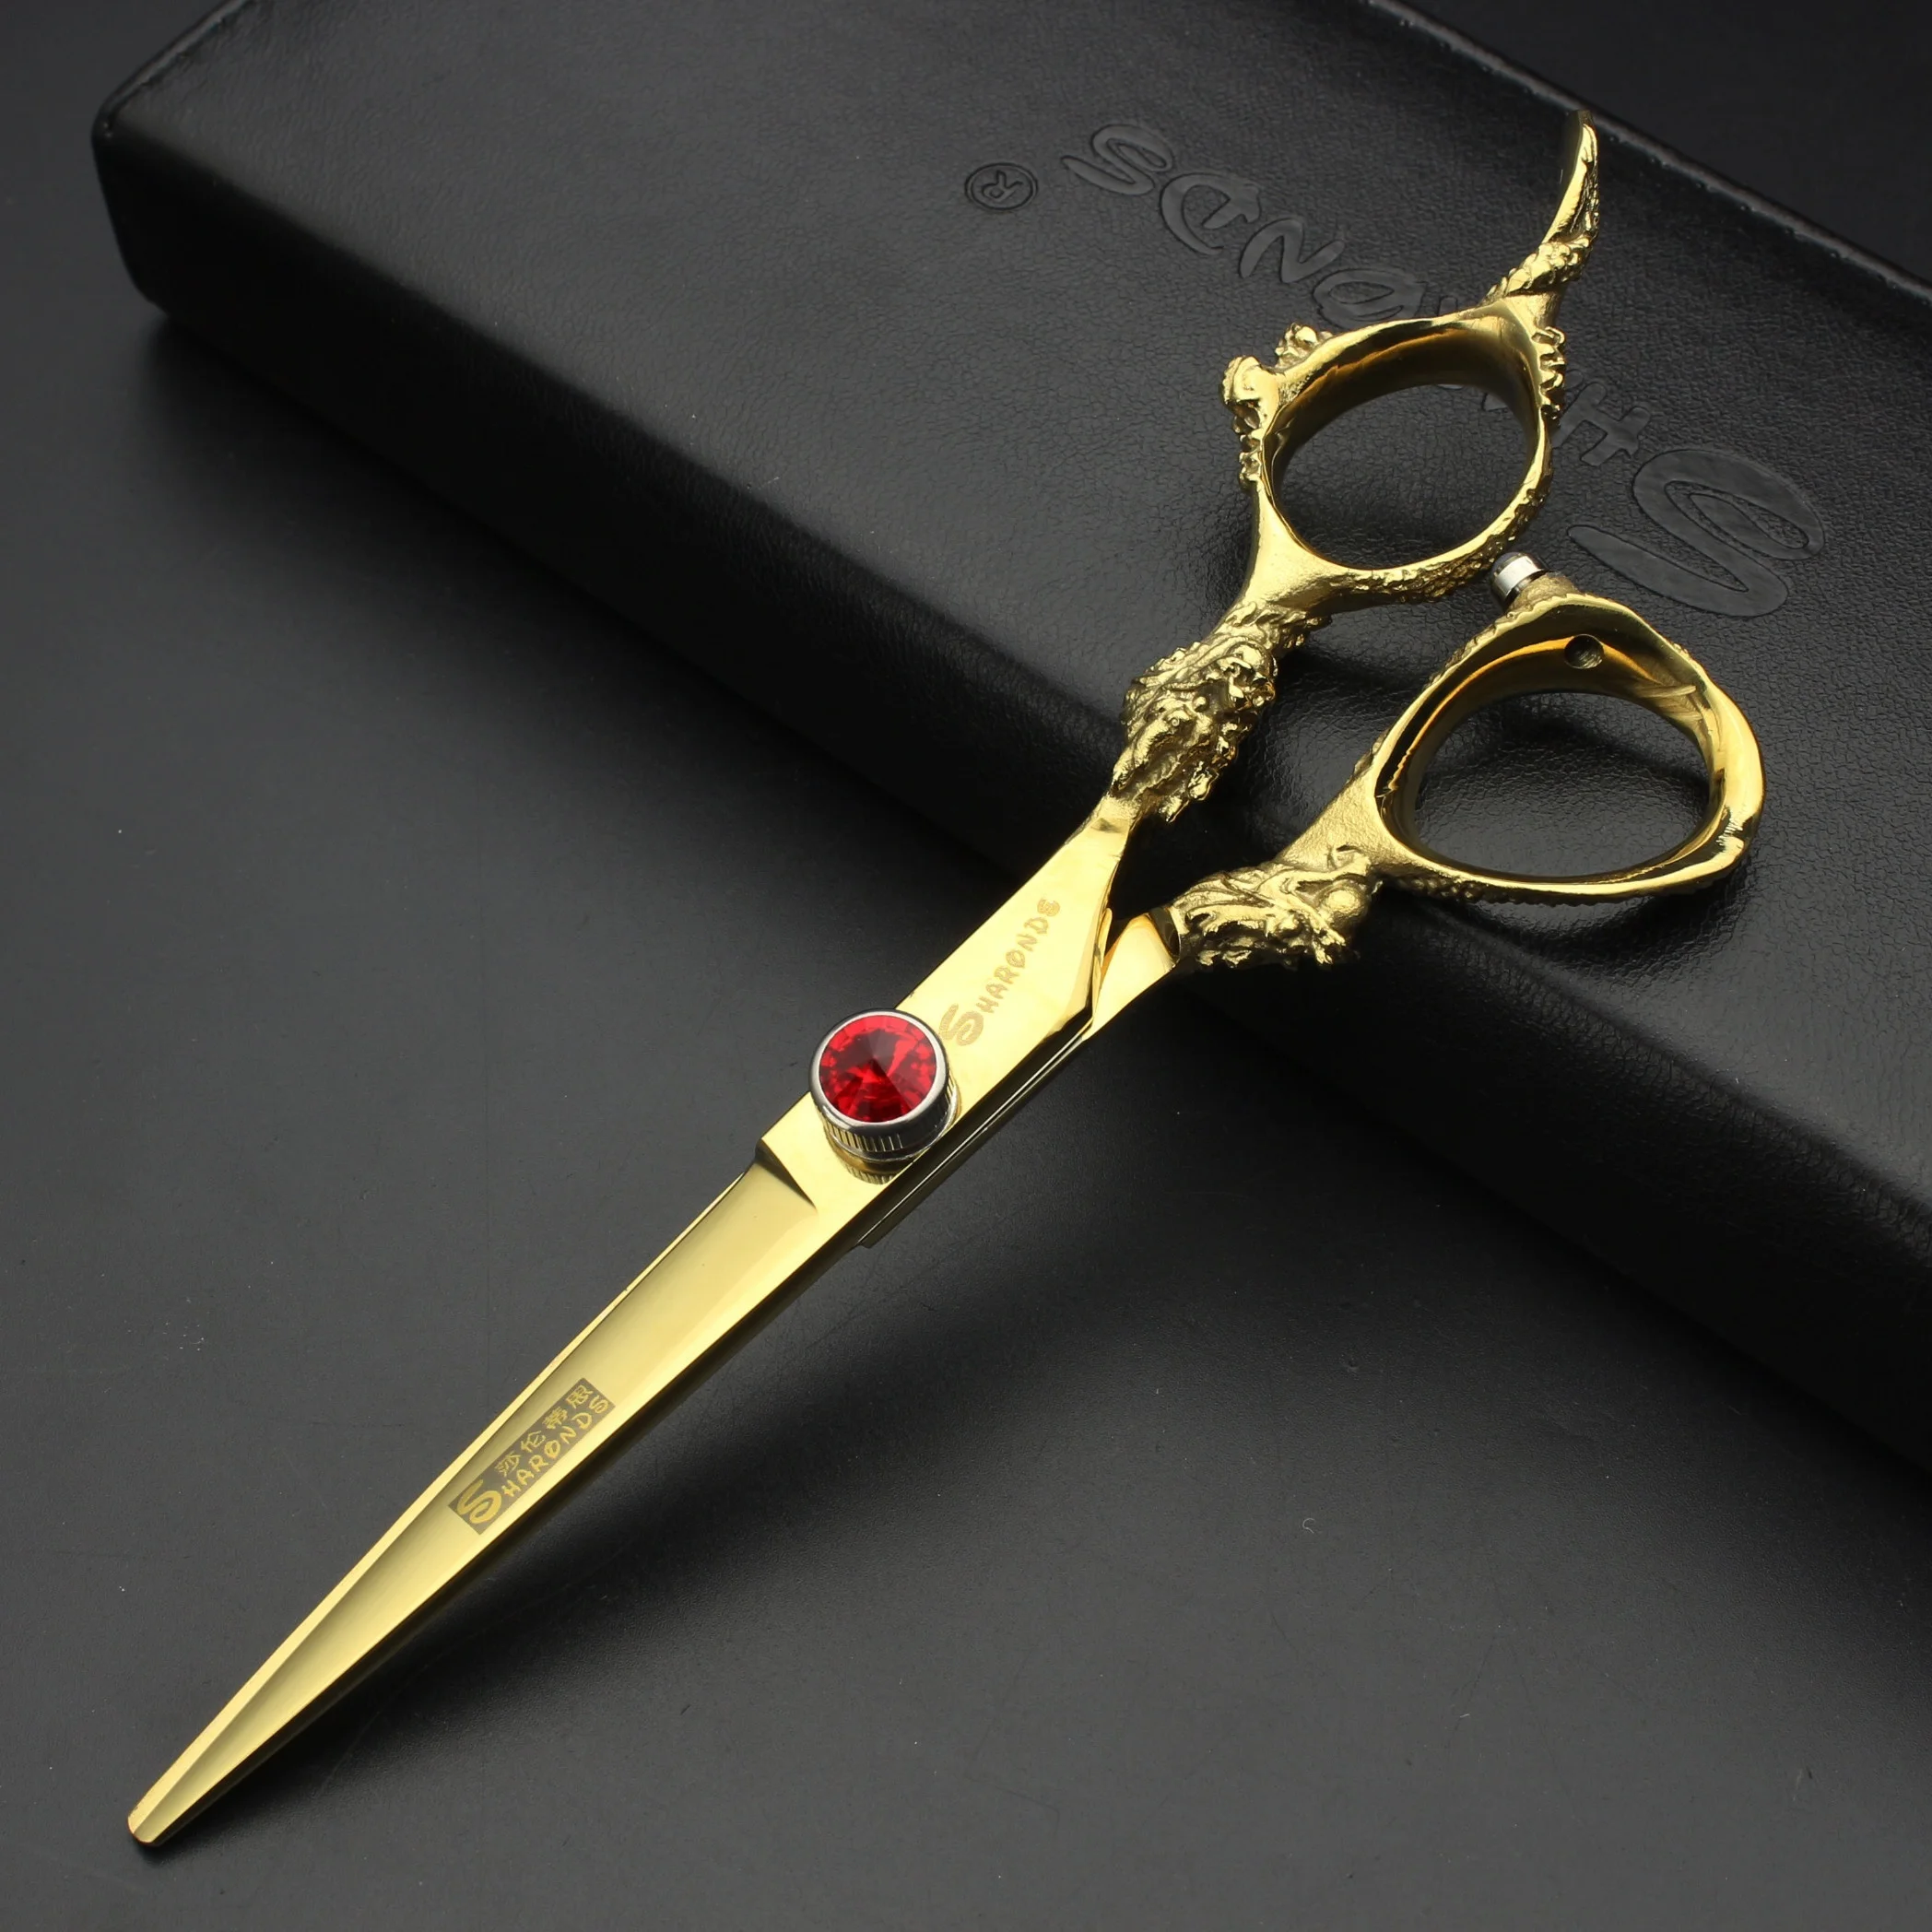 

Dog Groomer Golden Dragon Grooming Scissors Professional Pet Supplies 6 Inch 440c Cutting Thinning Shears Haircut 20%-30%